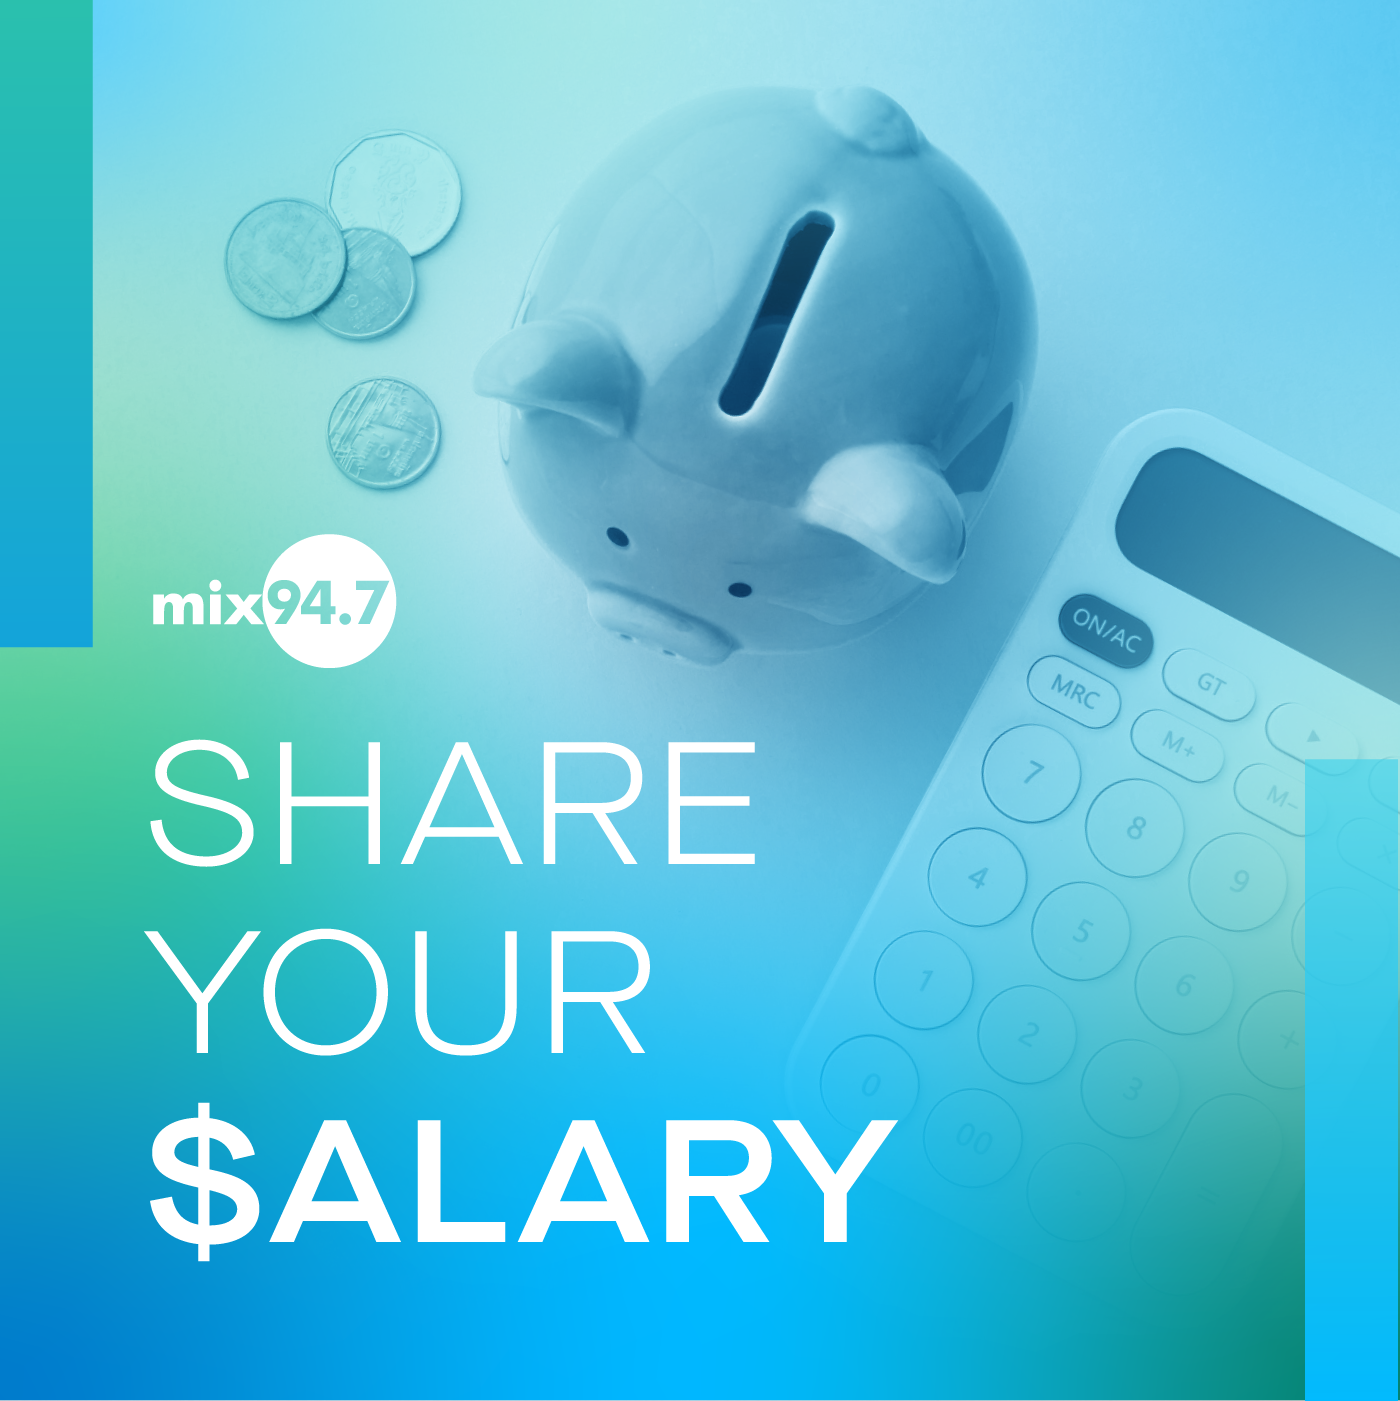 Mix 94.7's Share Your Salary